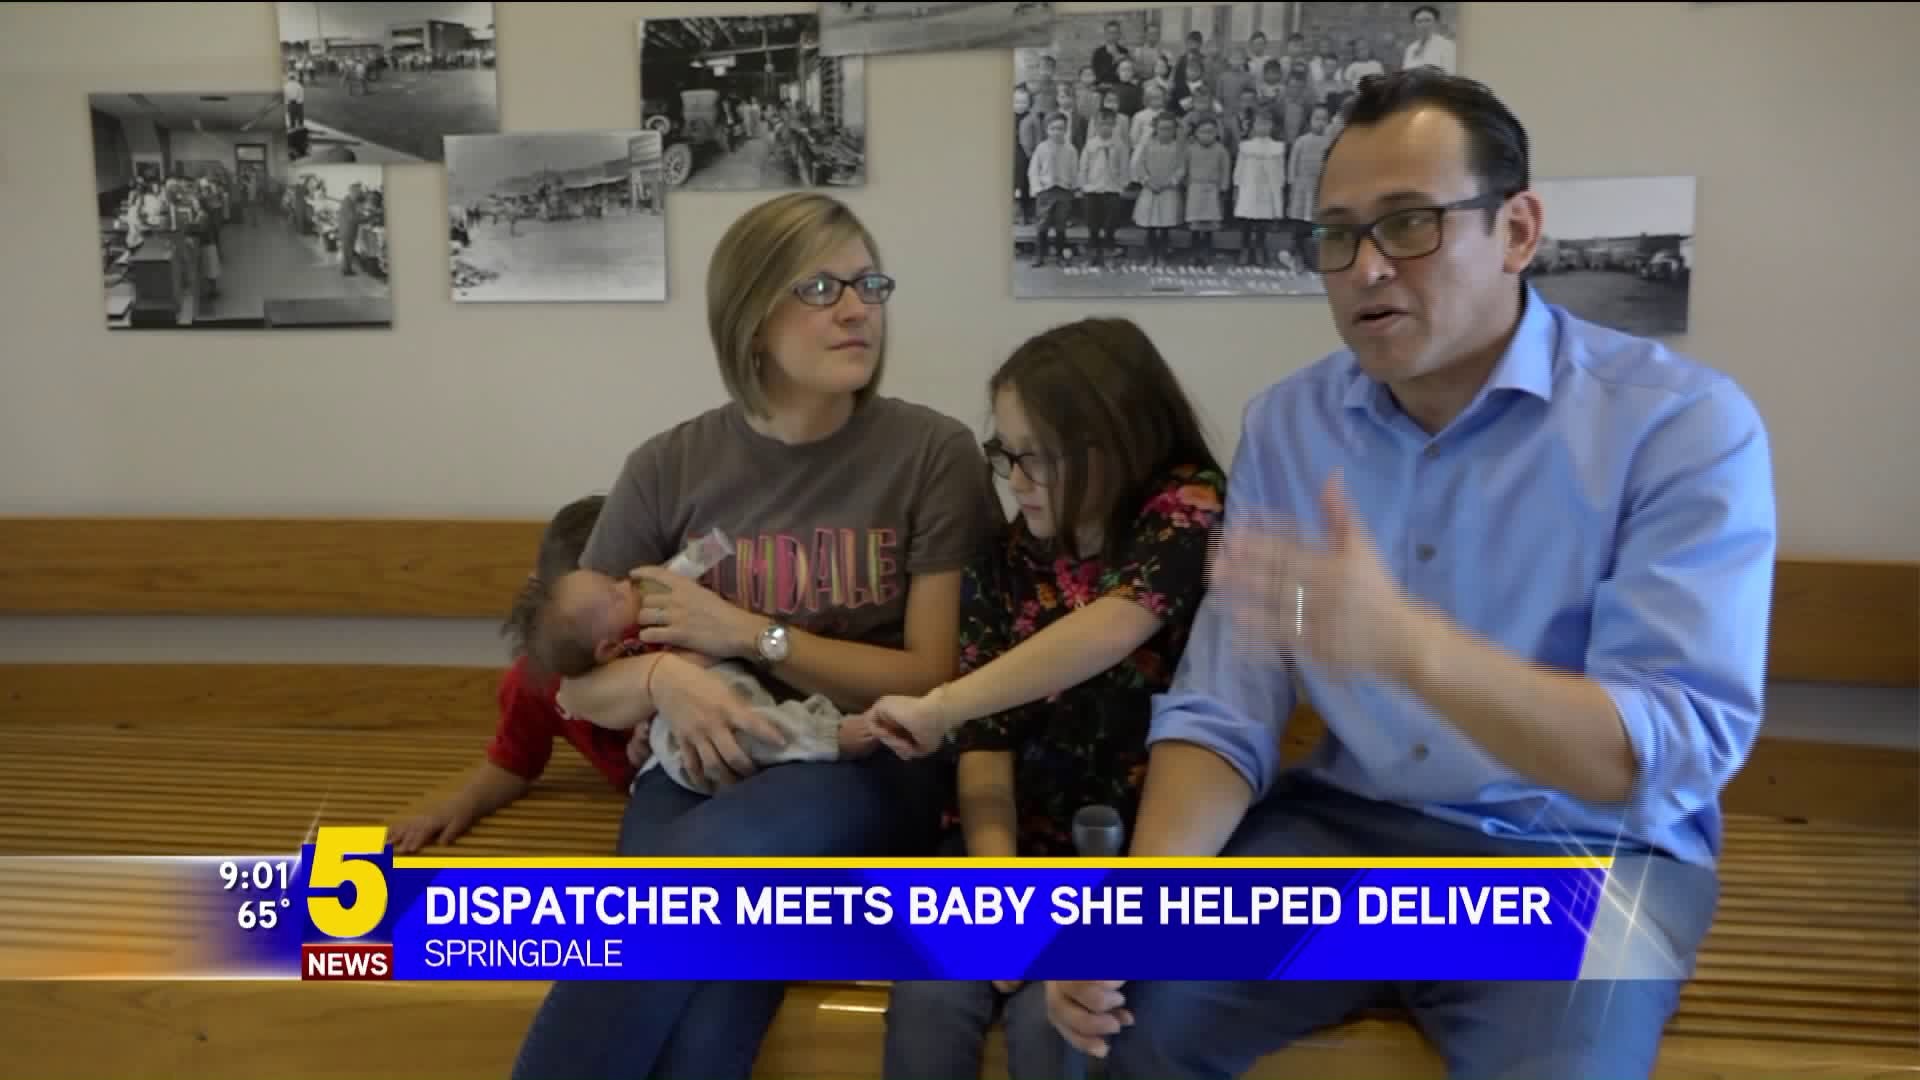 Dispatcher Meets Baby She Helped Deliver